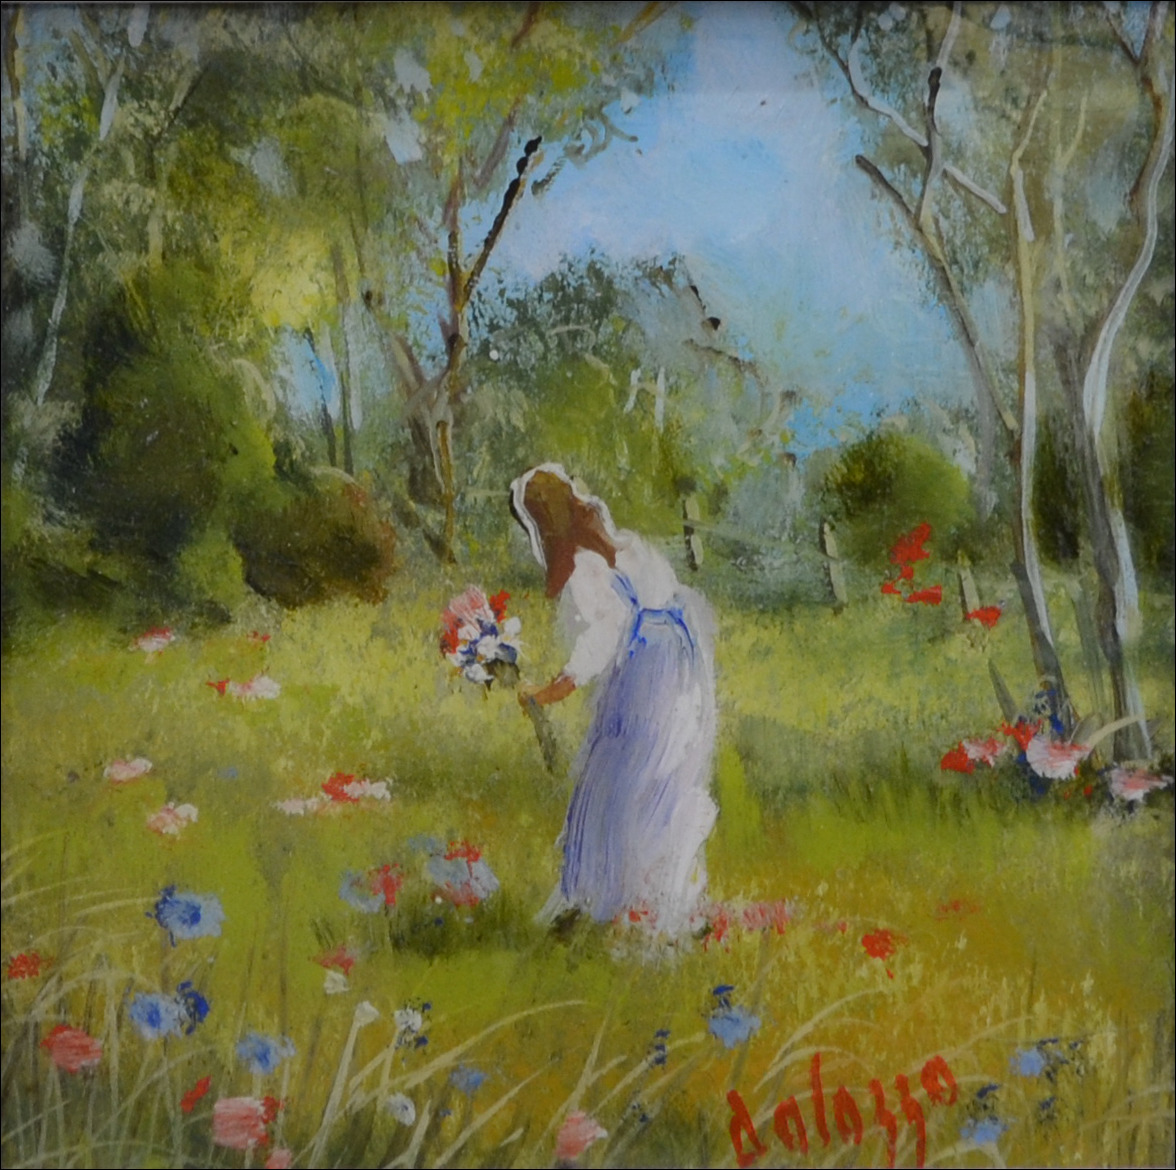 Forest Romantic "Picking Flowers" Original Artwork by Lucette Dalozzo